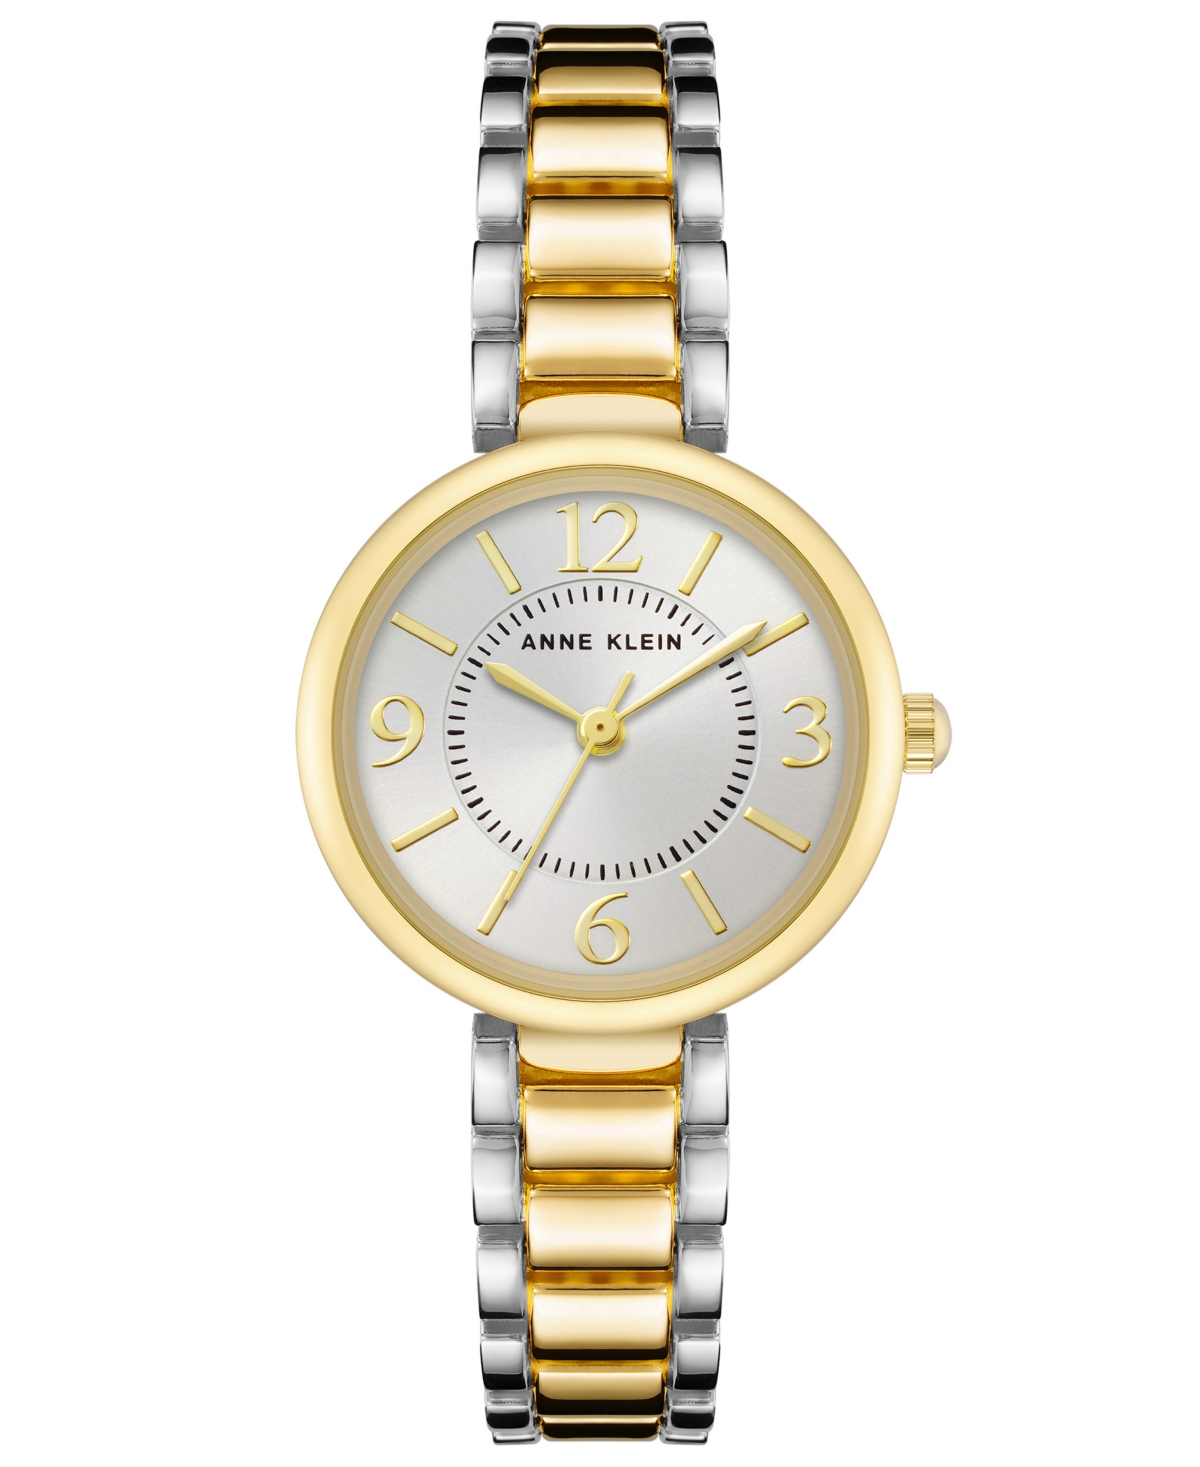 Women's Silver-Tone and Gold-Tone Alloy Bracelet Watch, 30.5mm - Silver-Tone, Gold-Tone